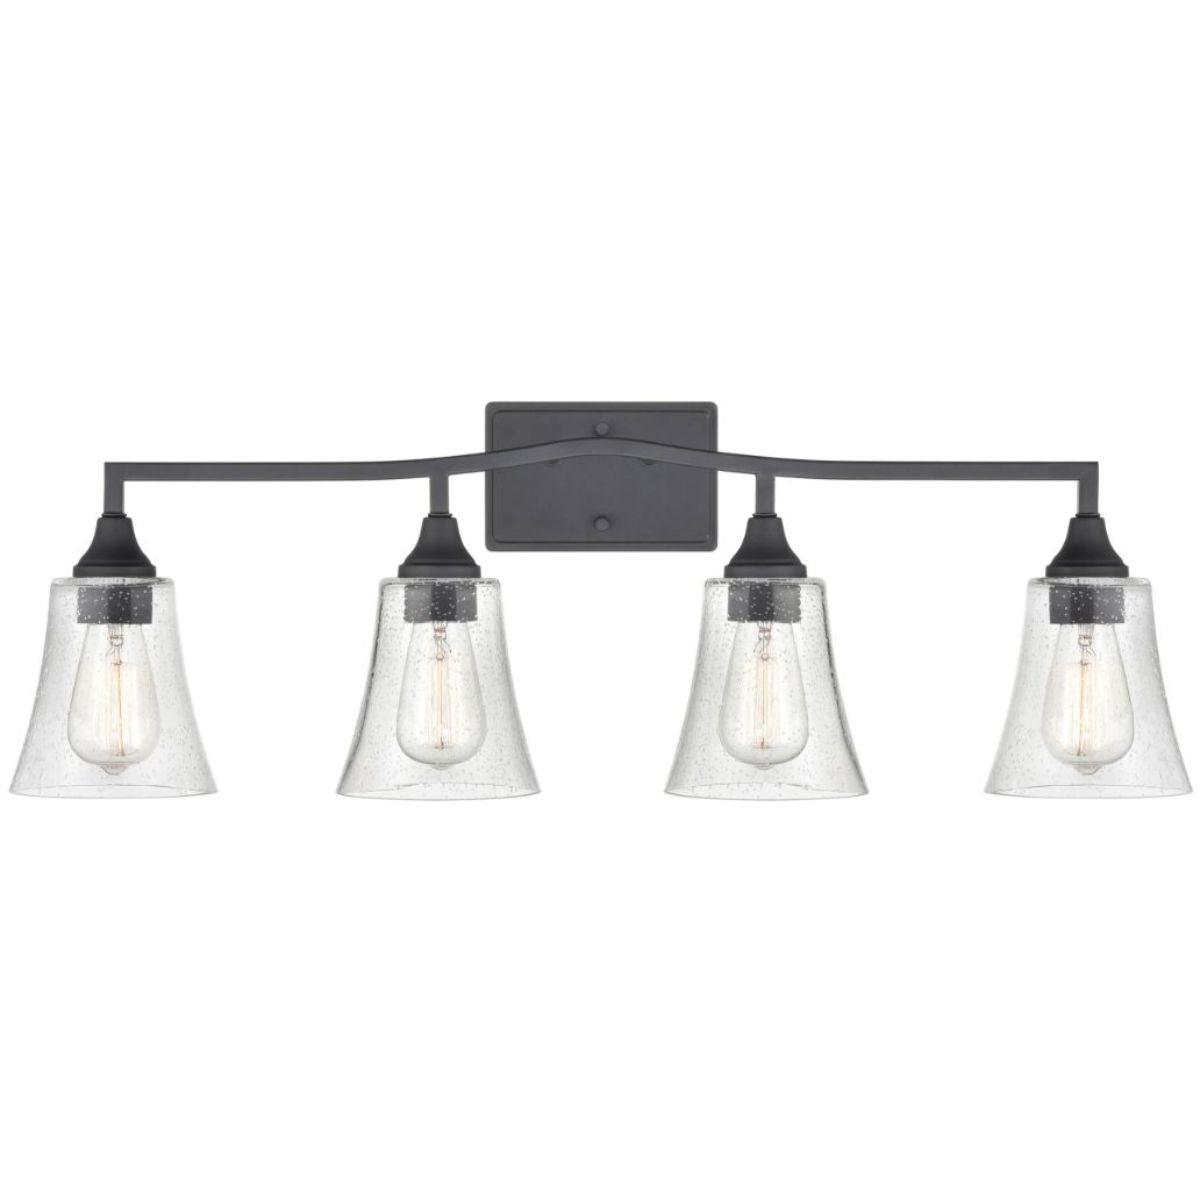 Caily 33 in 4 Lights Vanity Light